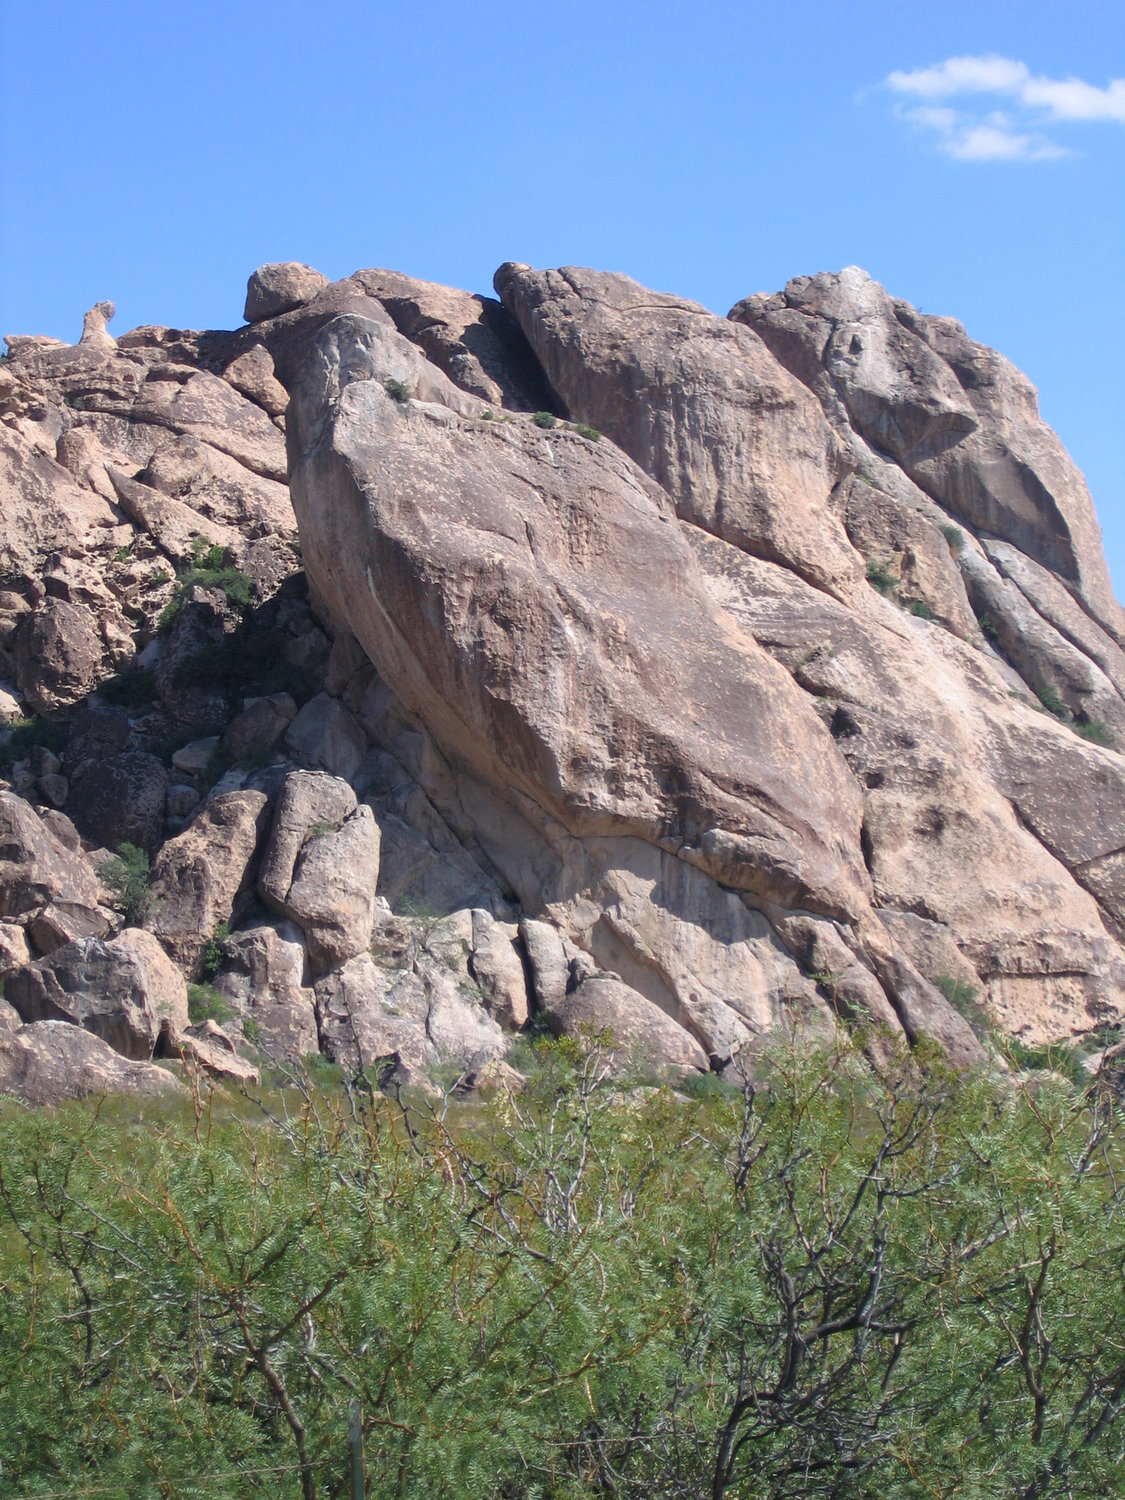 A guardian eagle in rock identified by a Toltec-Michica elder overlooks the drive into Hueco Tanks Texas State Park, 20 miles east of El Paso.